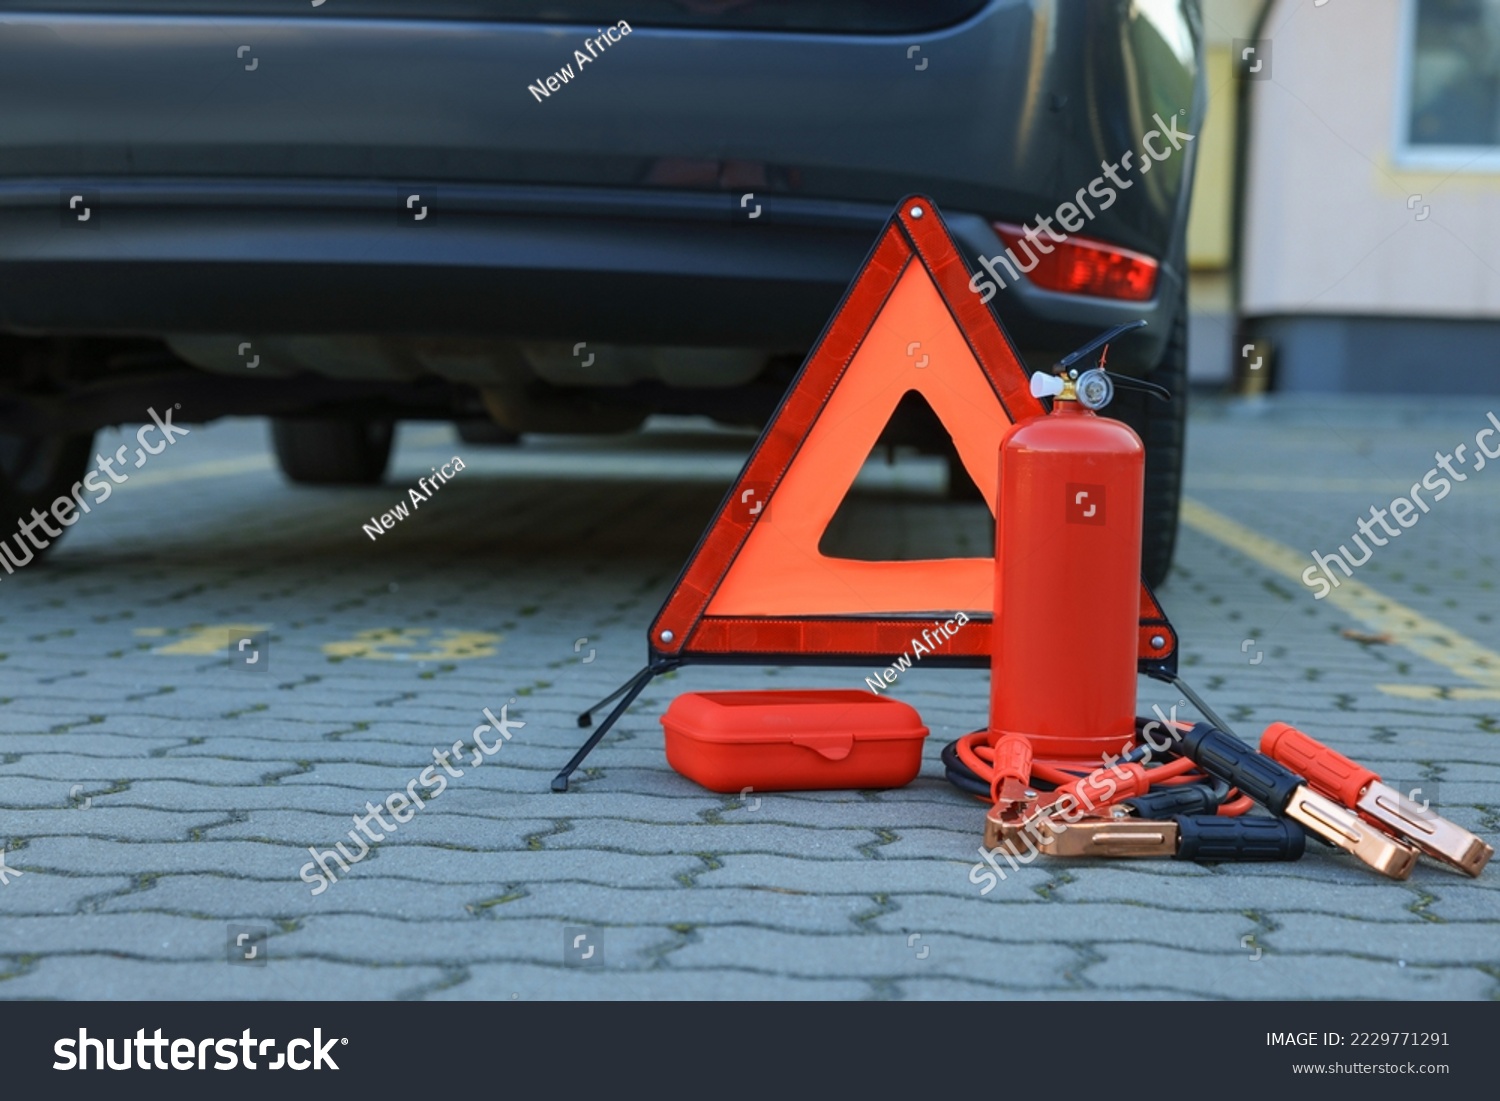 Emergency warning triangle and safety equipment near car, space for text #2229771291